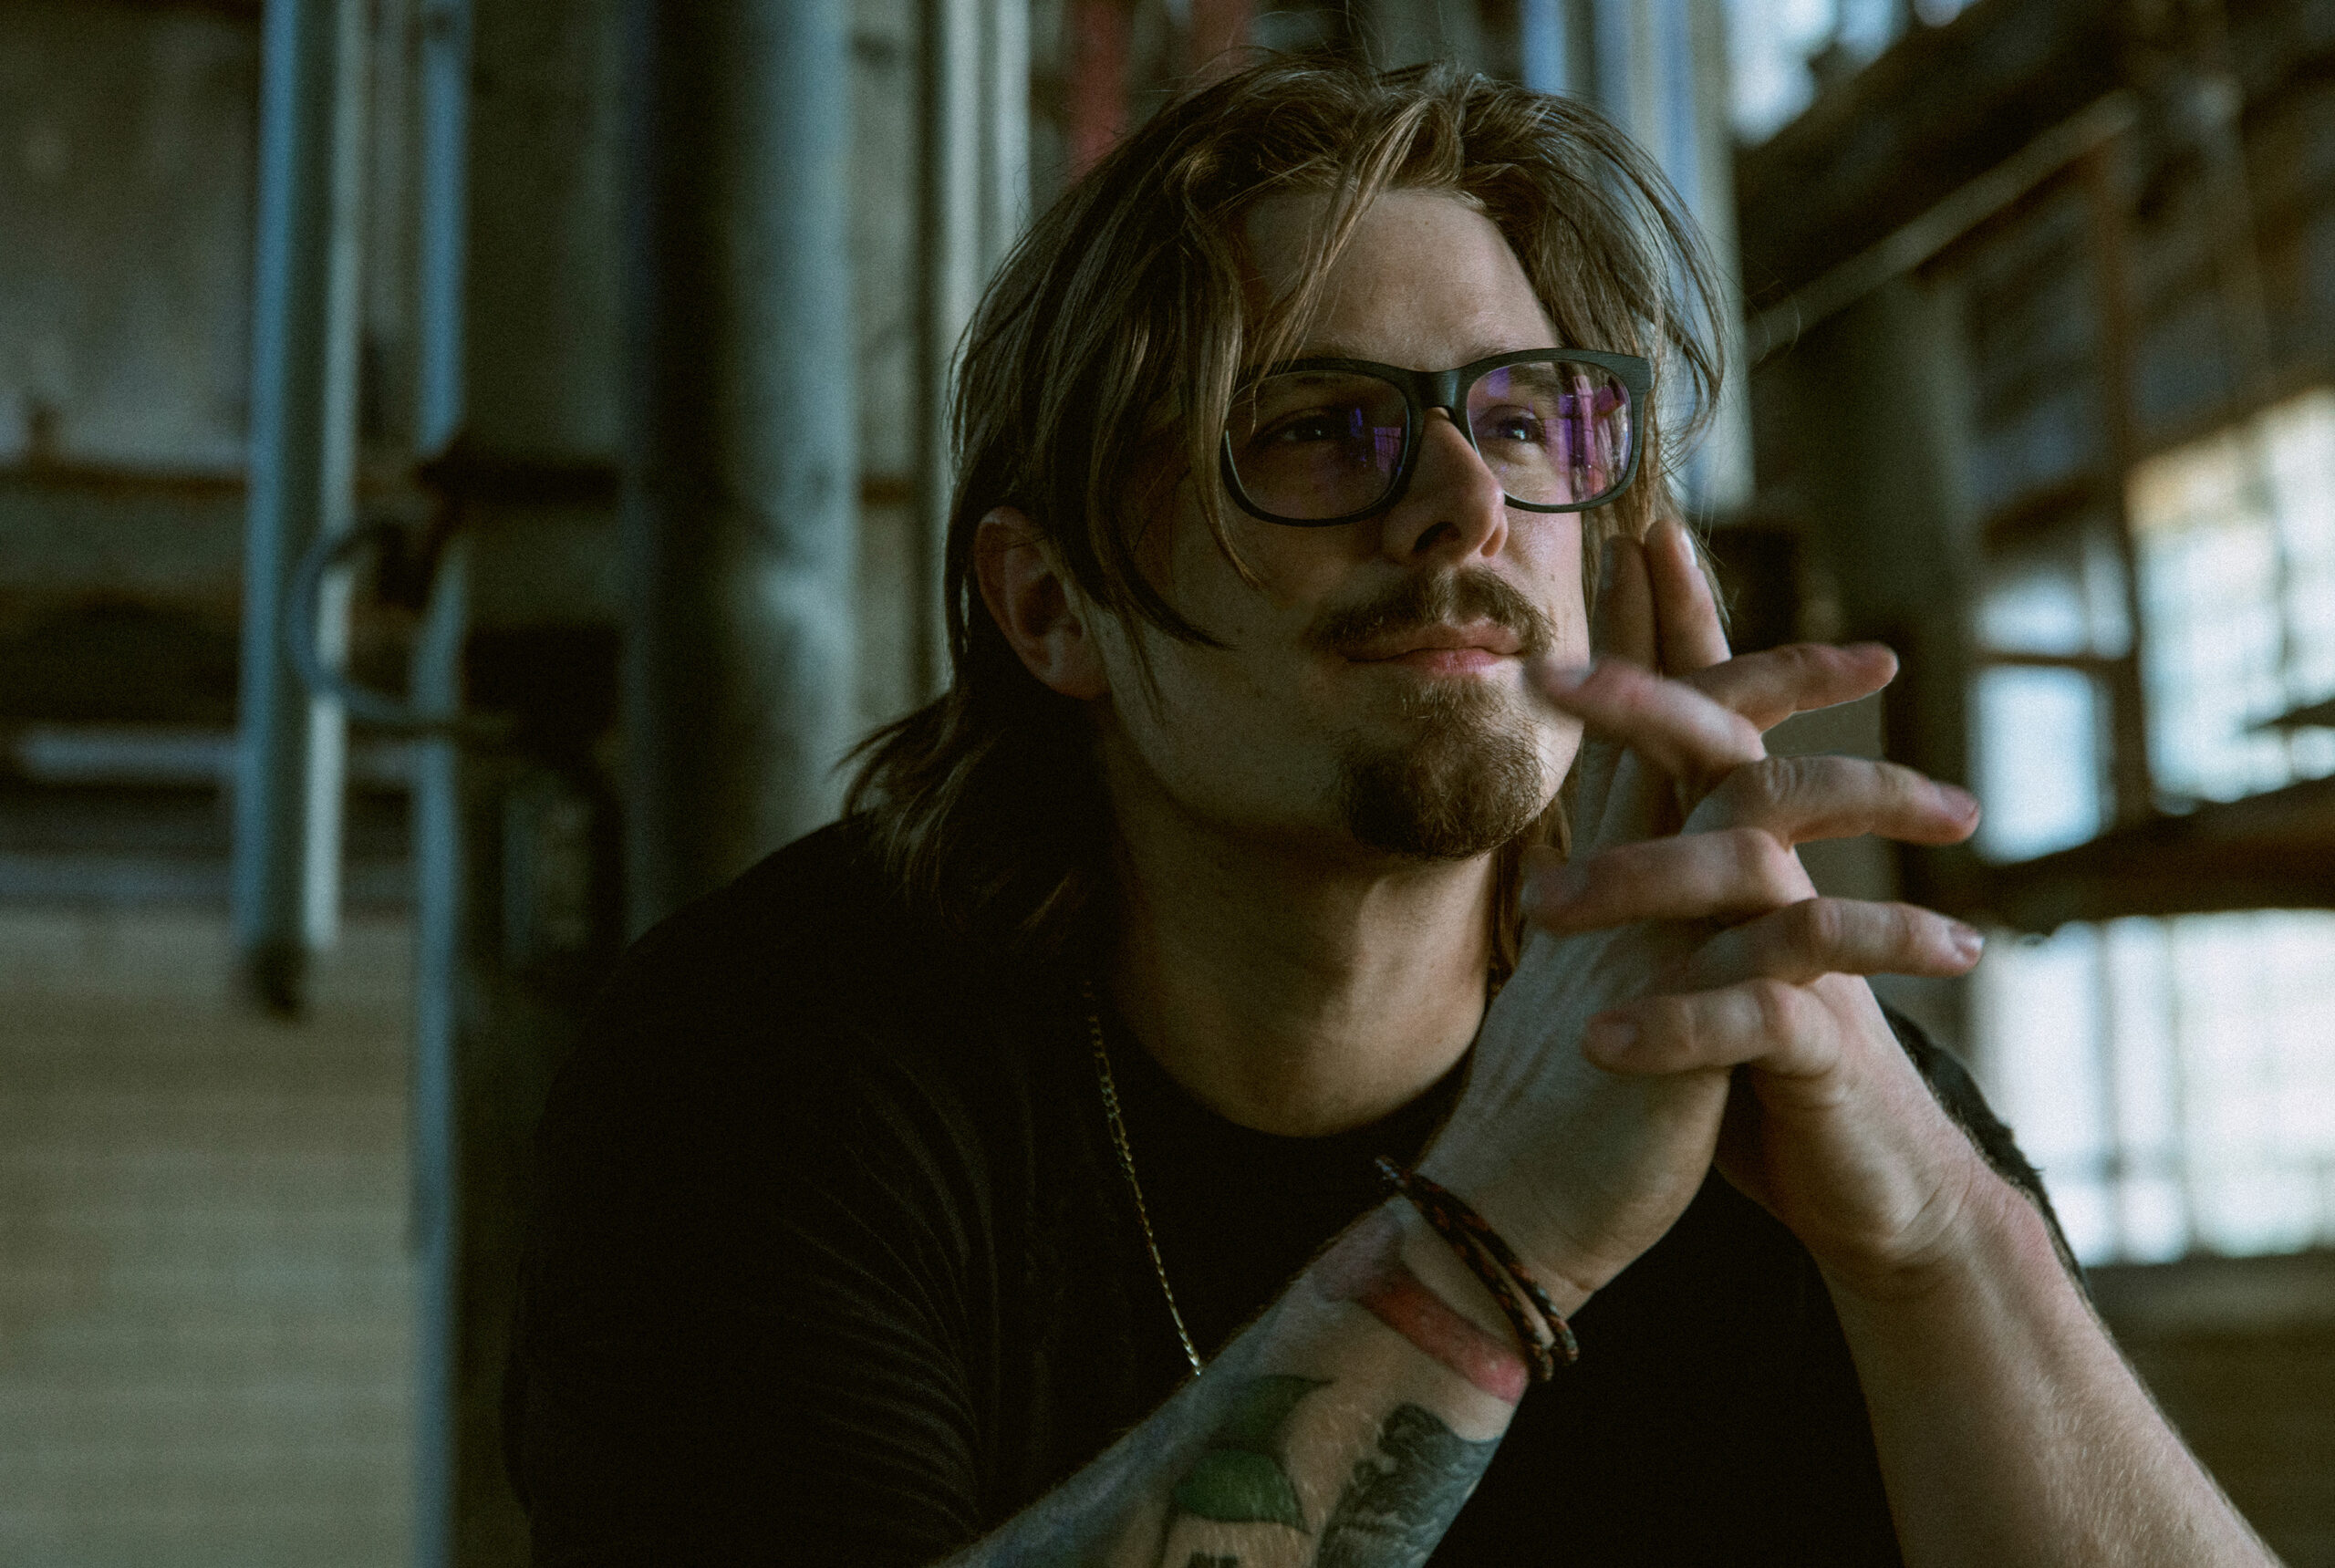 HARDY Finds Himself on the Wrong Side of the “Truck Bed” in New Music Video – Watch Now